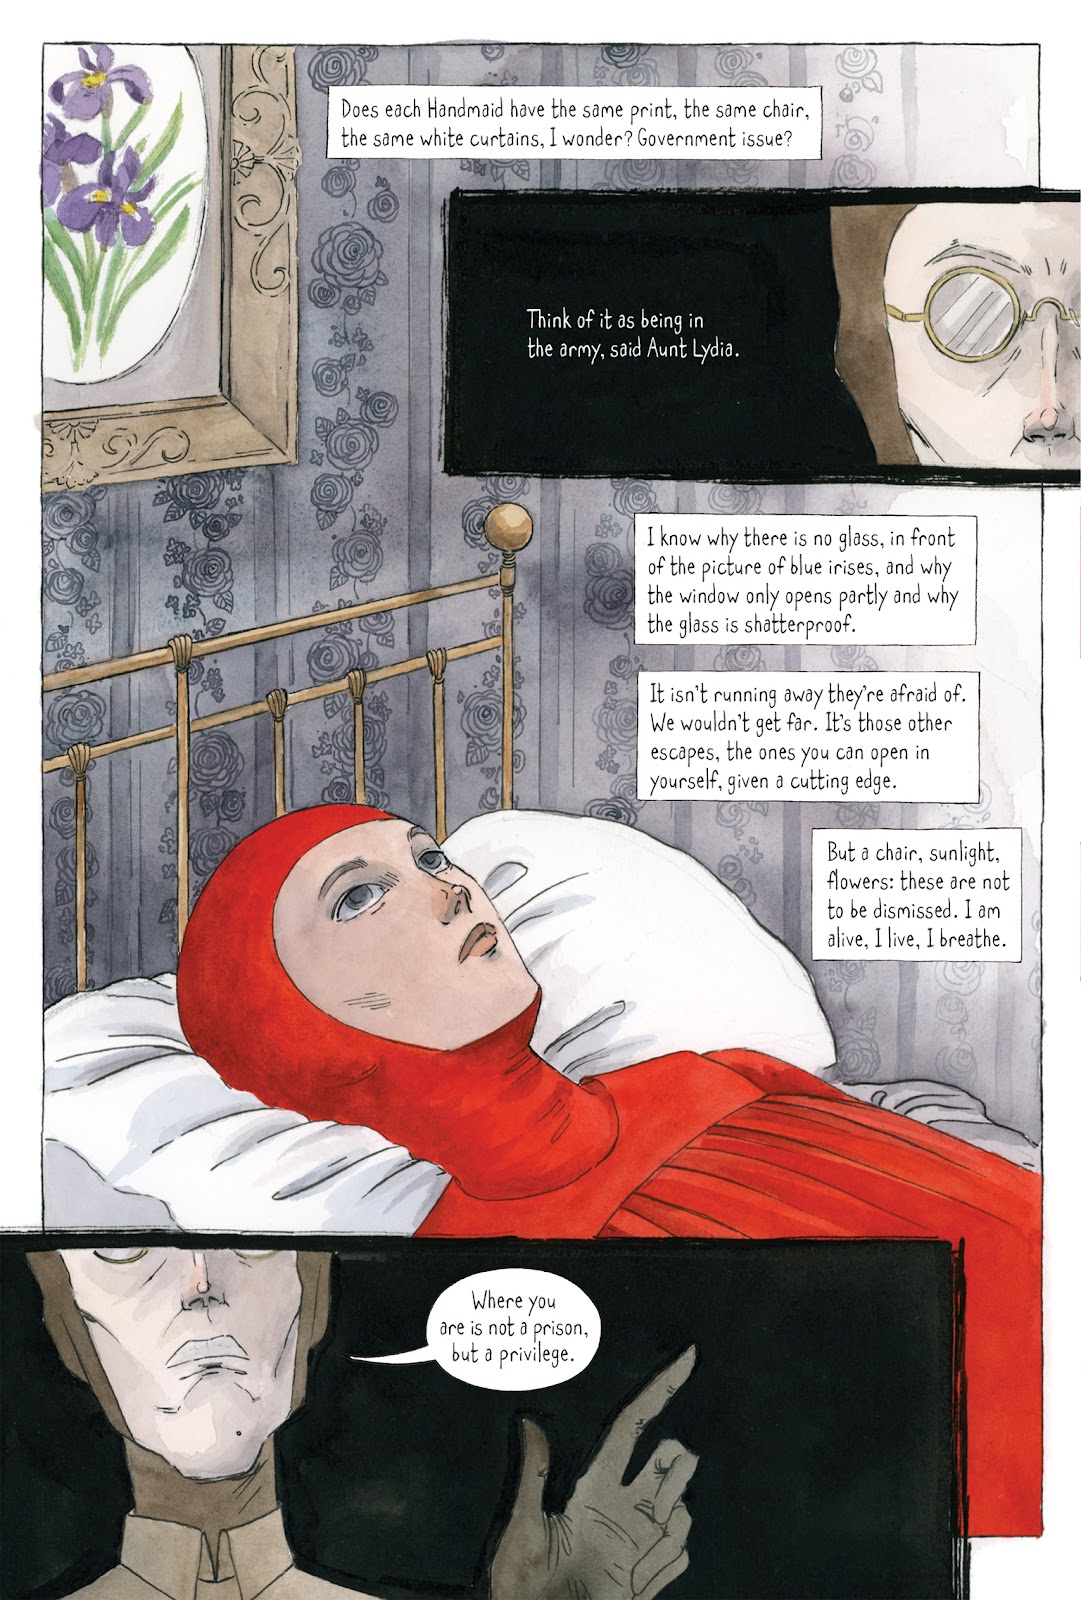 Read online The Handmaid's Tale: The Graphic Novel comic -  Issue # TPB (Part 1) - 10